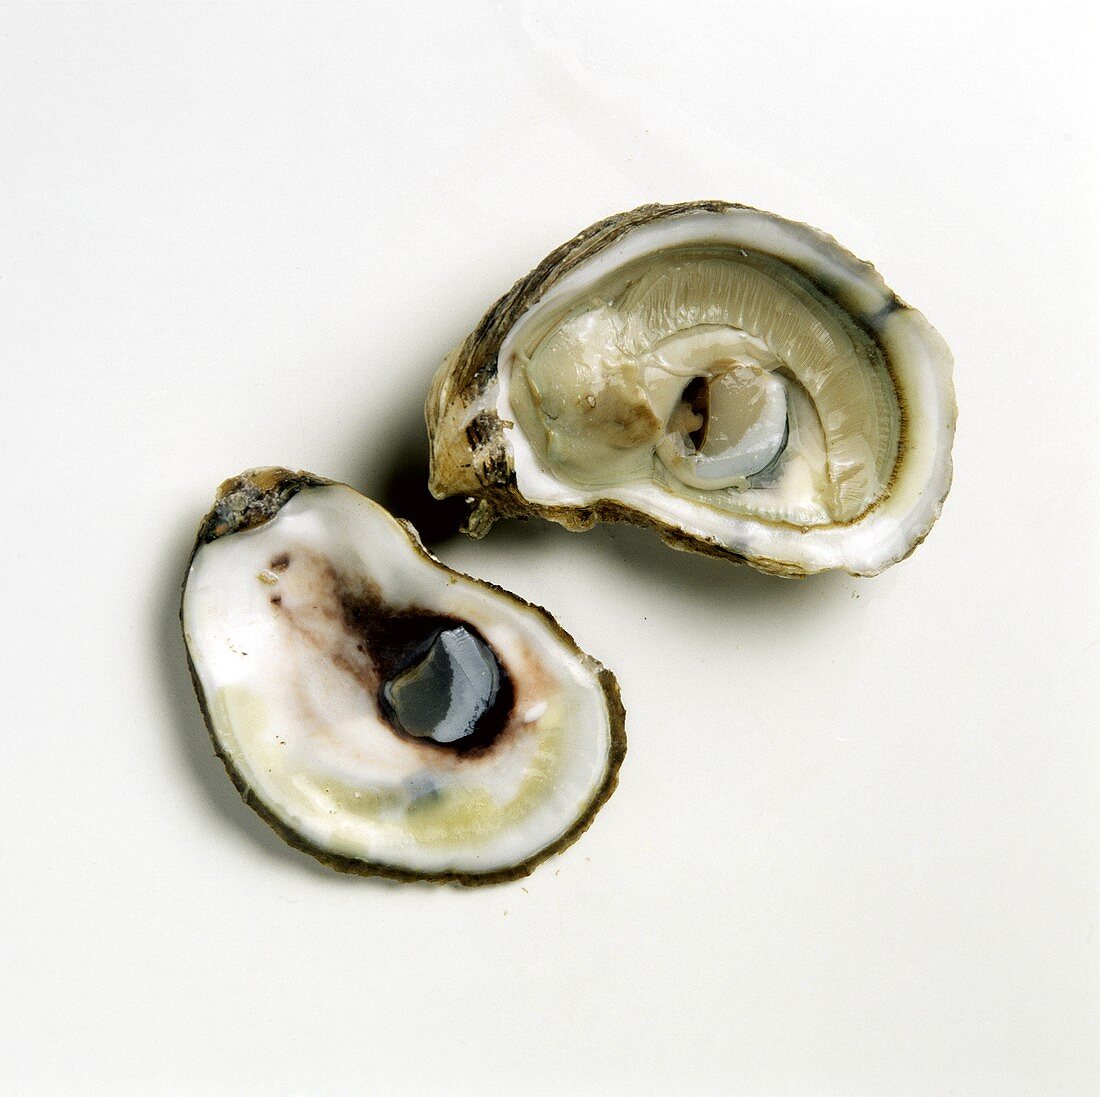 Two halves of an oyster (Cape Cod)